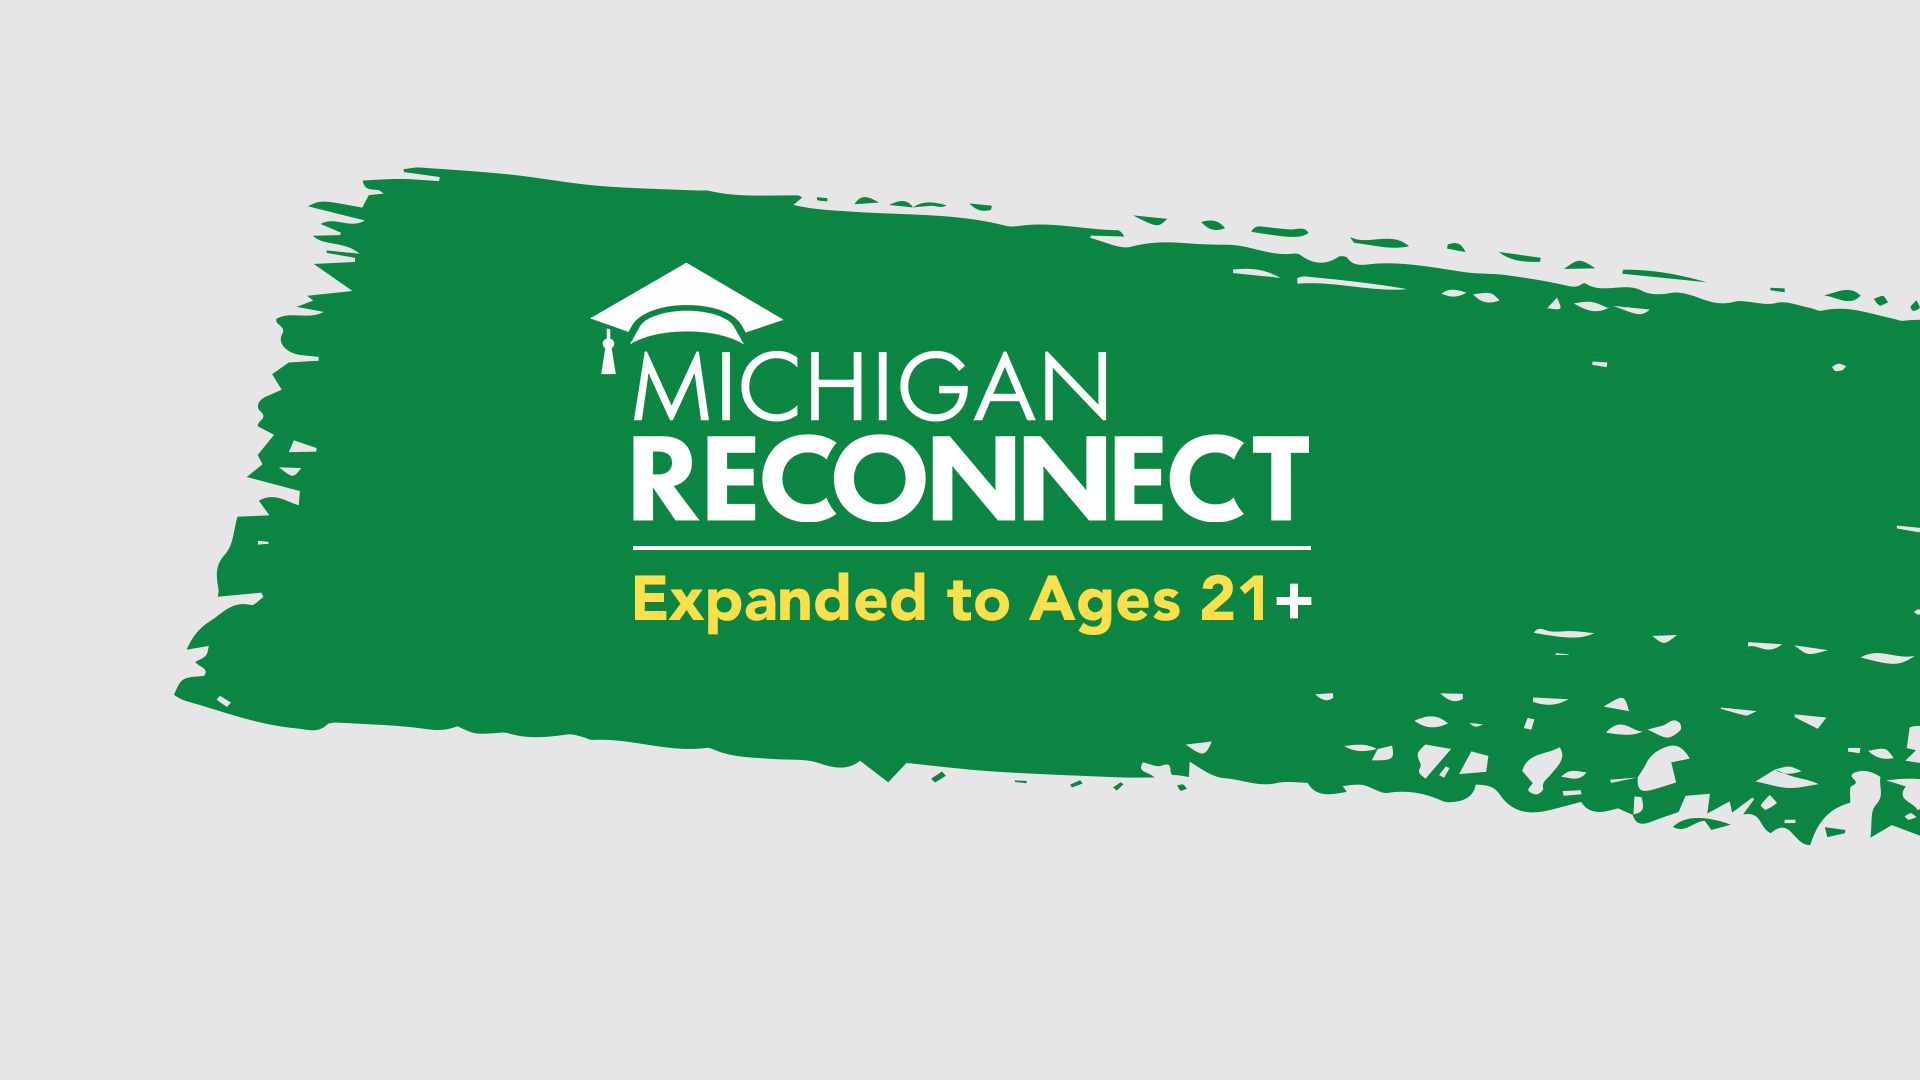 Michigan Reconnect has expanded to include more Michigan residents.